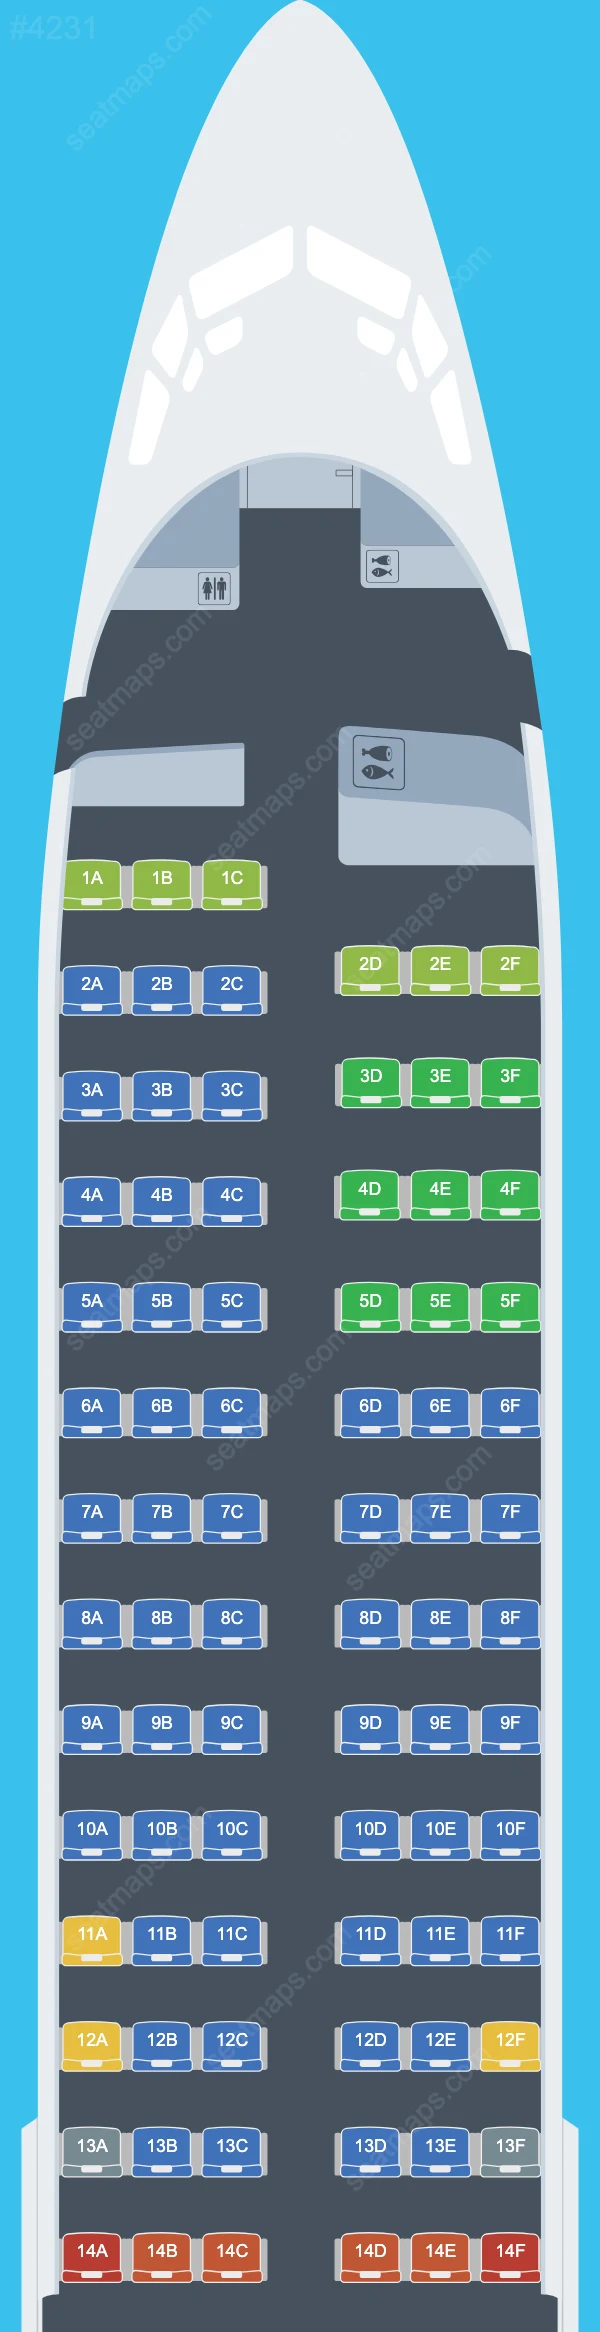 Sunwing Airlines Boeing 737 Seat Maps 737-800